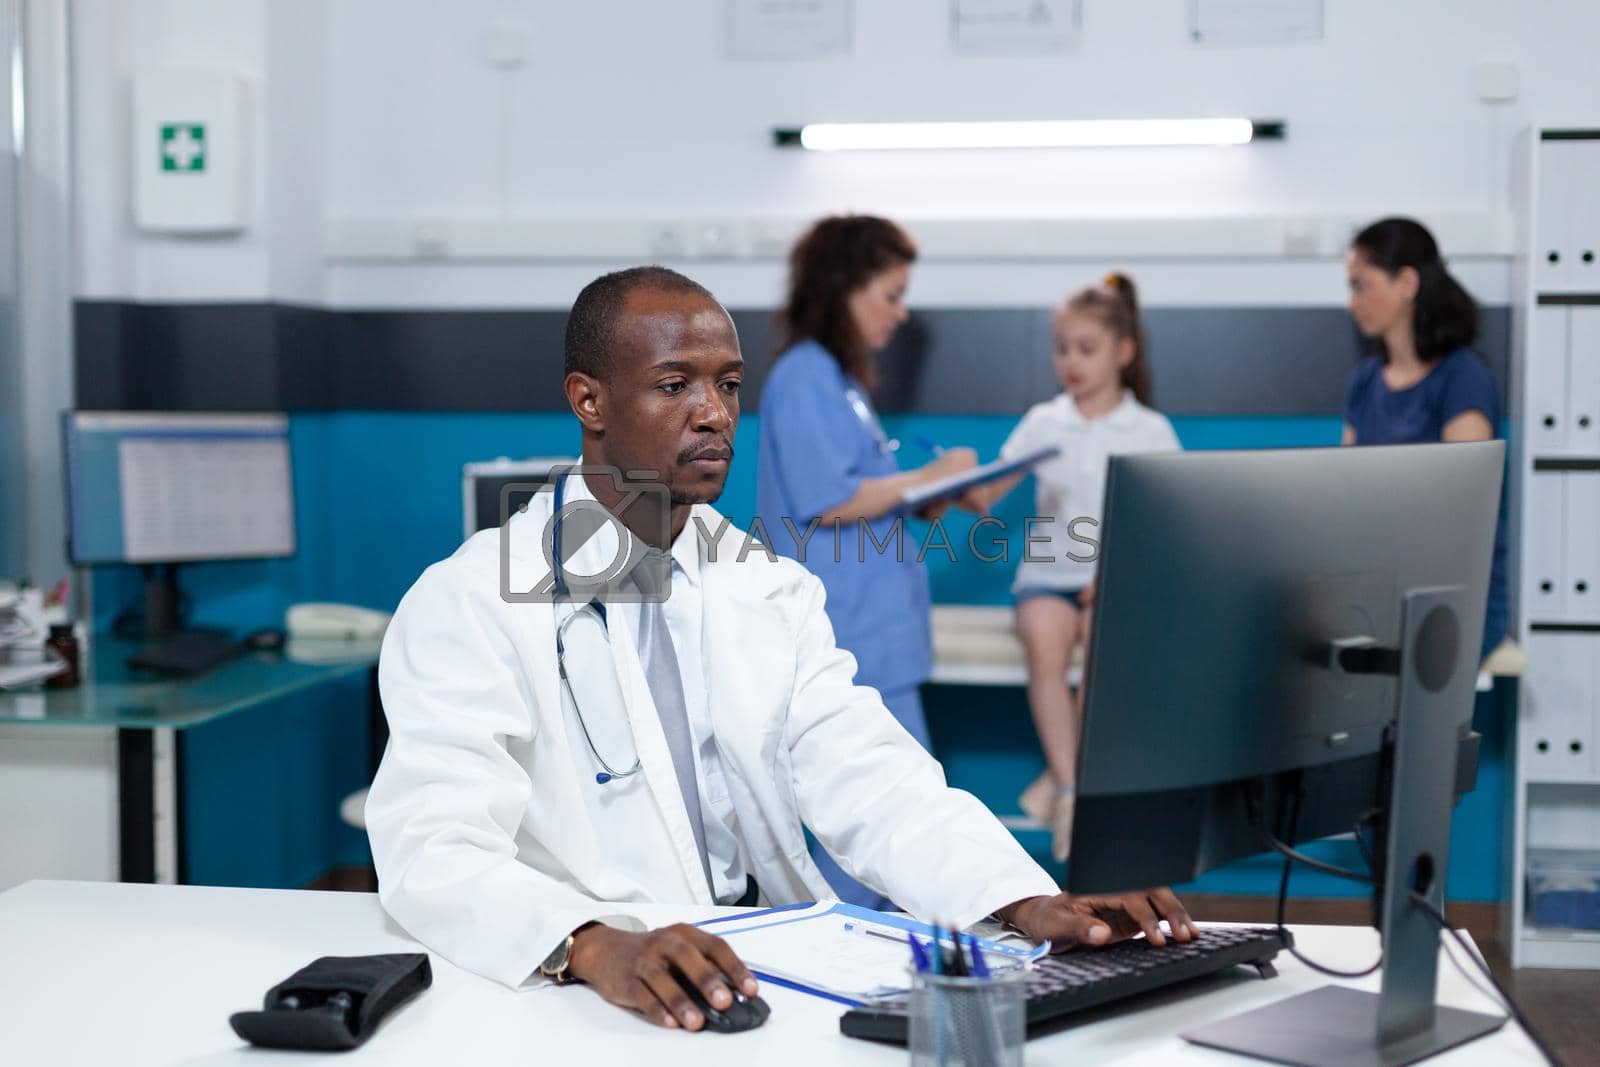 African american pediatrician doctor working at healthcare treatment in hospital office typing medical expertise on computer during clinical examination. In background nurse examining patient